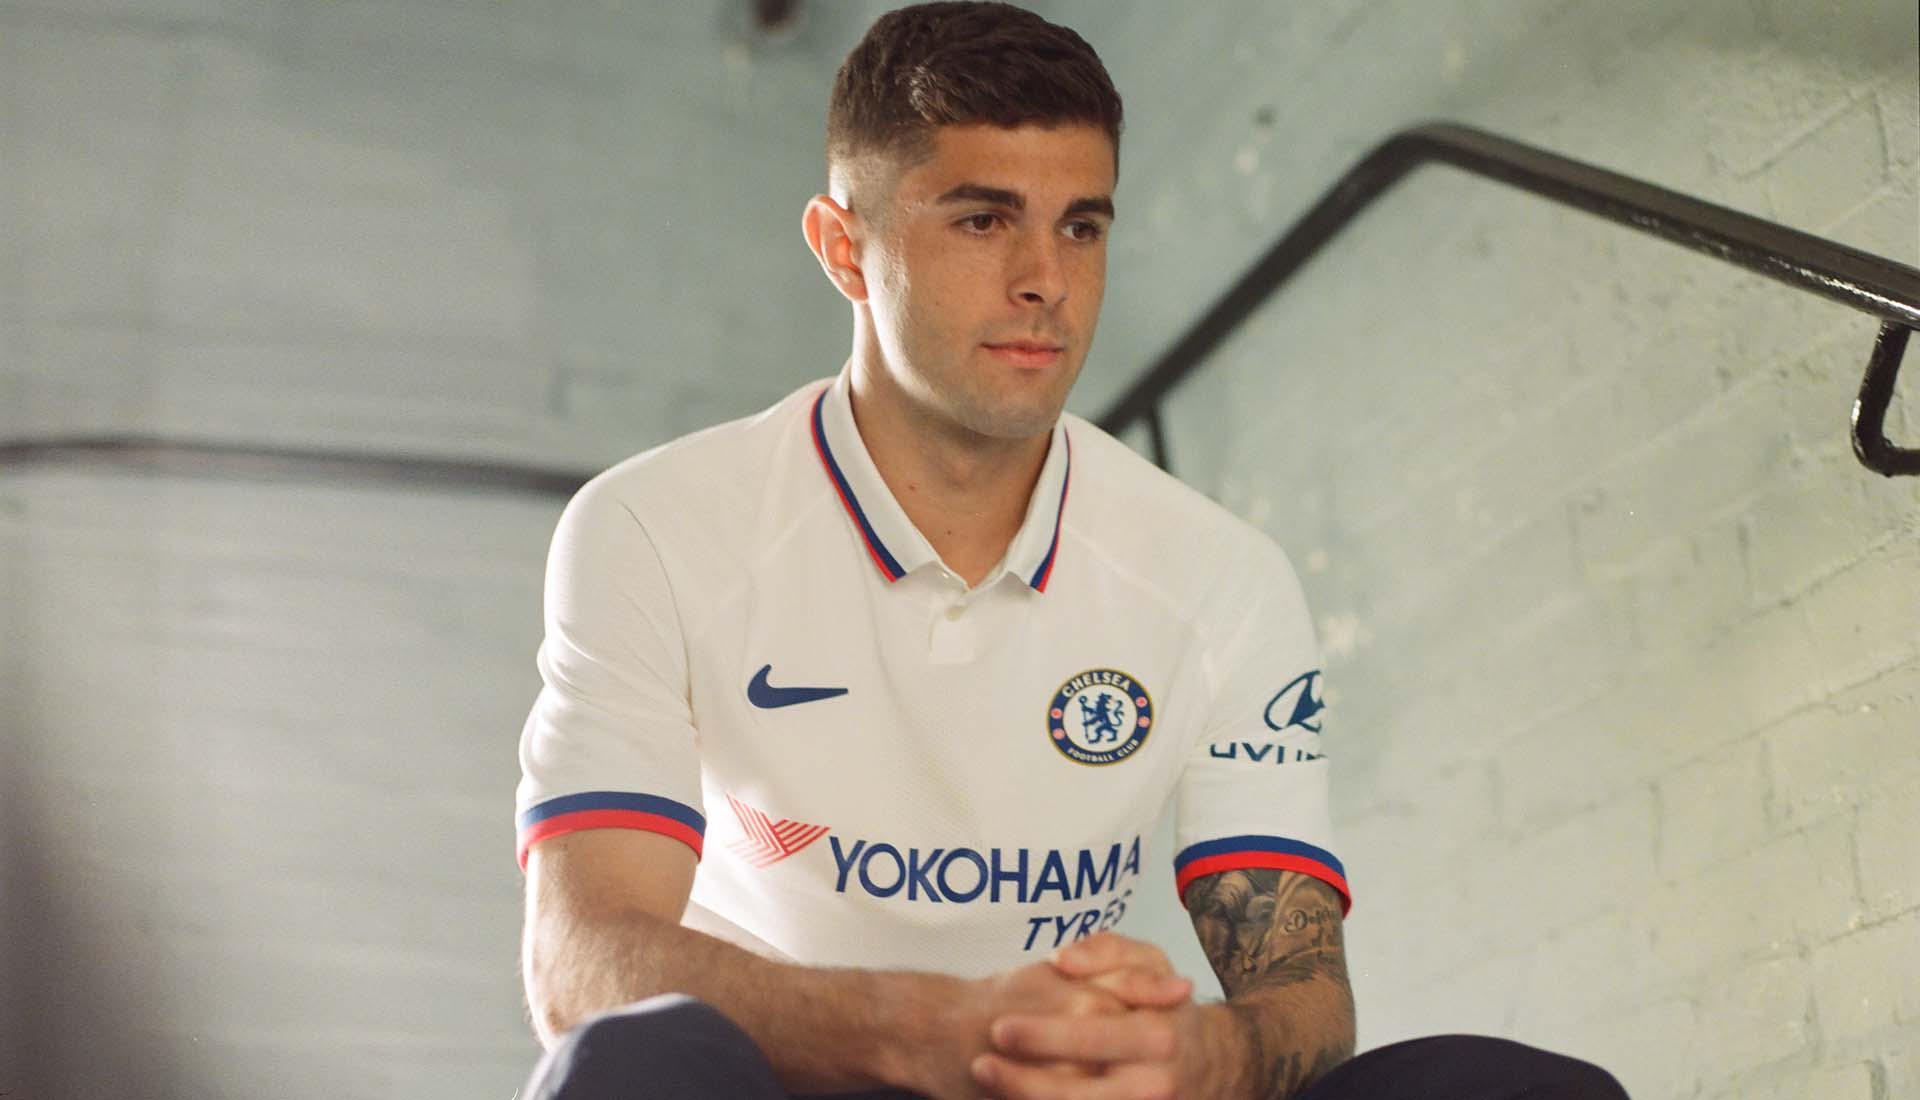 pulisic white chelsea jersey